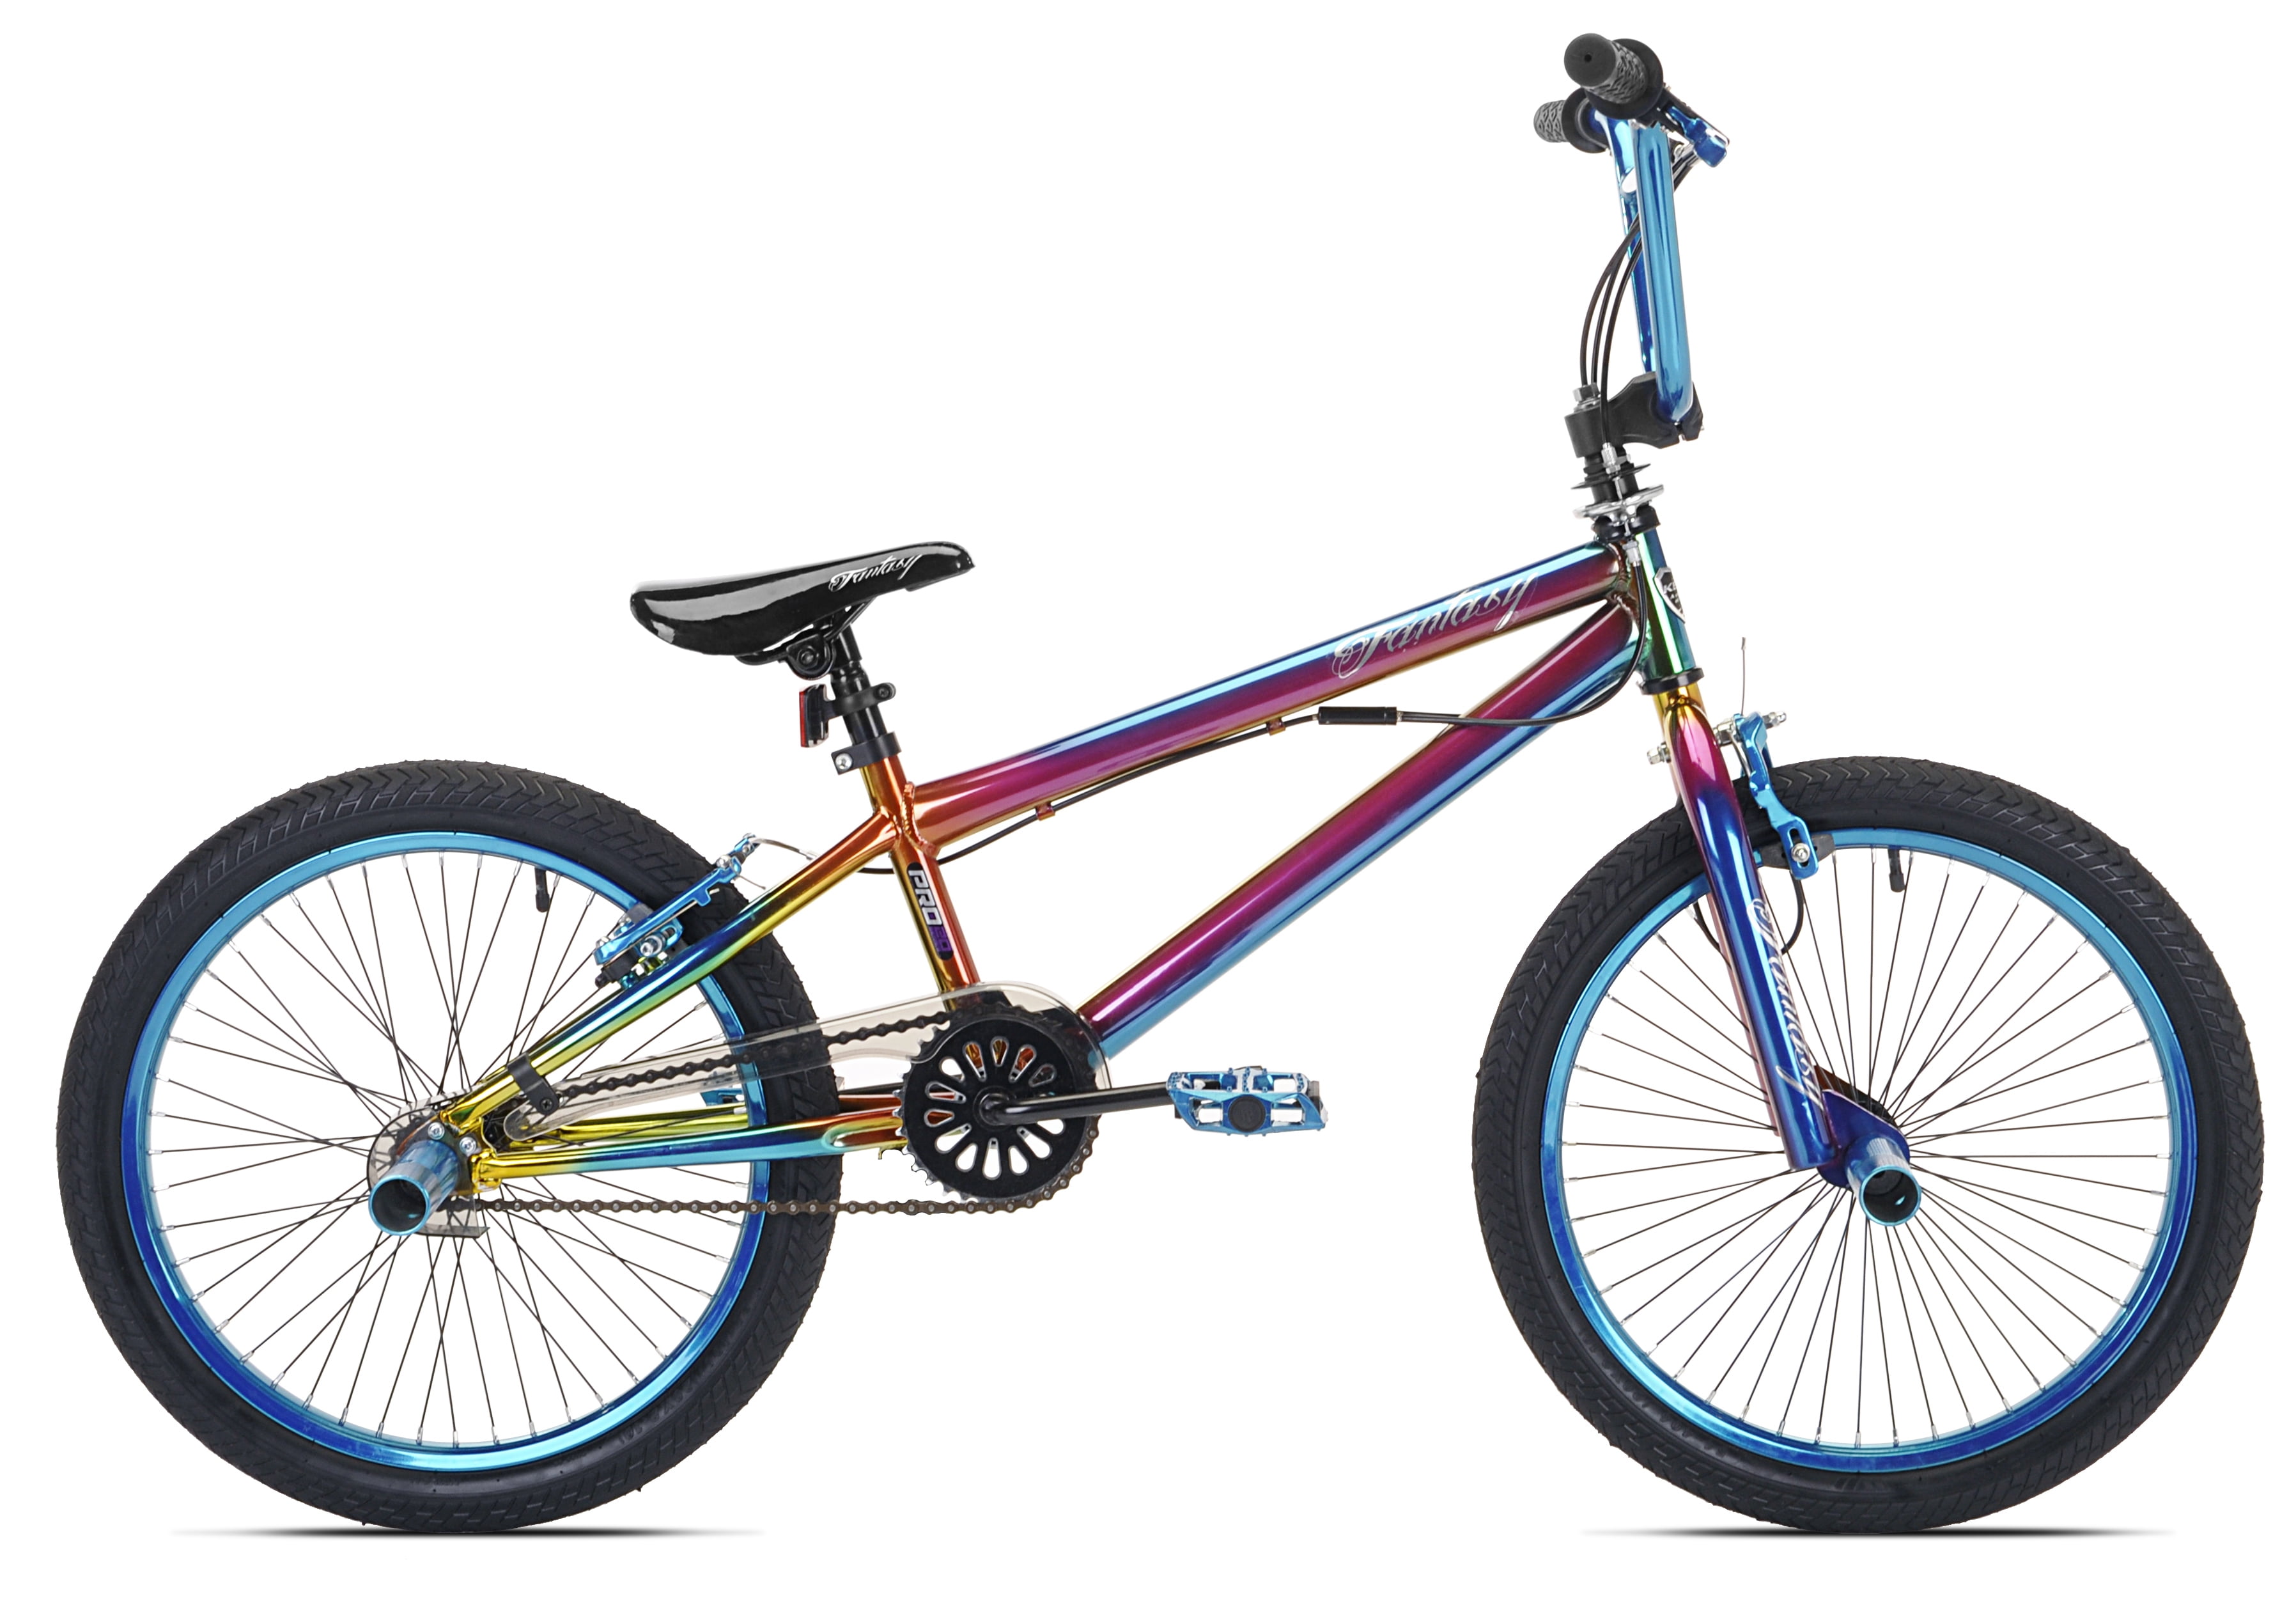 walmart bikes for 7 year olds